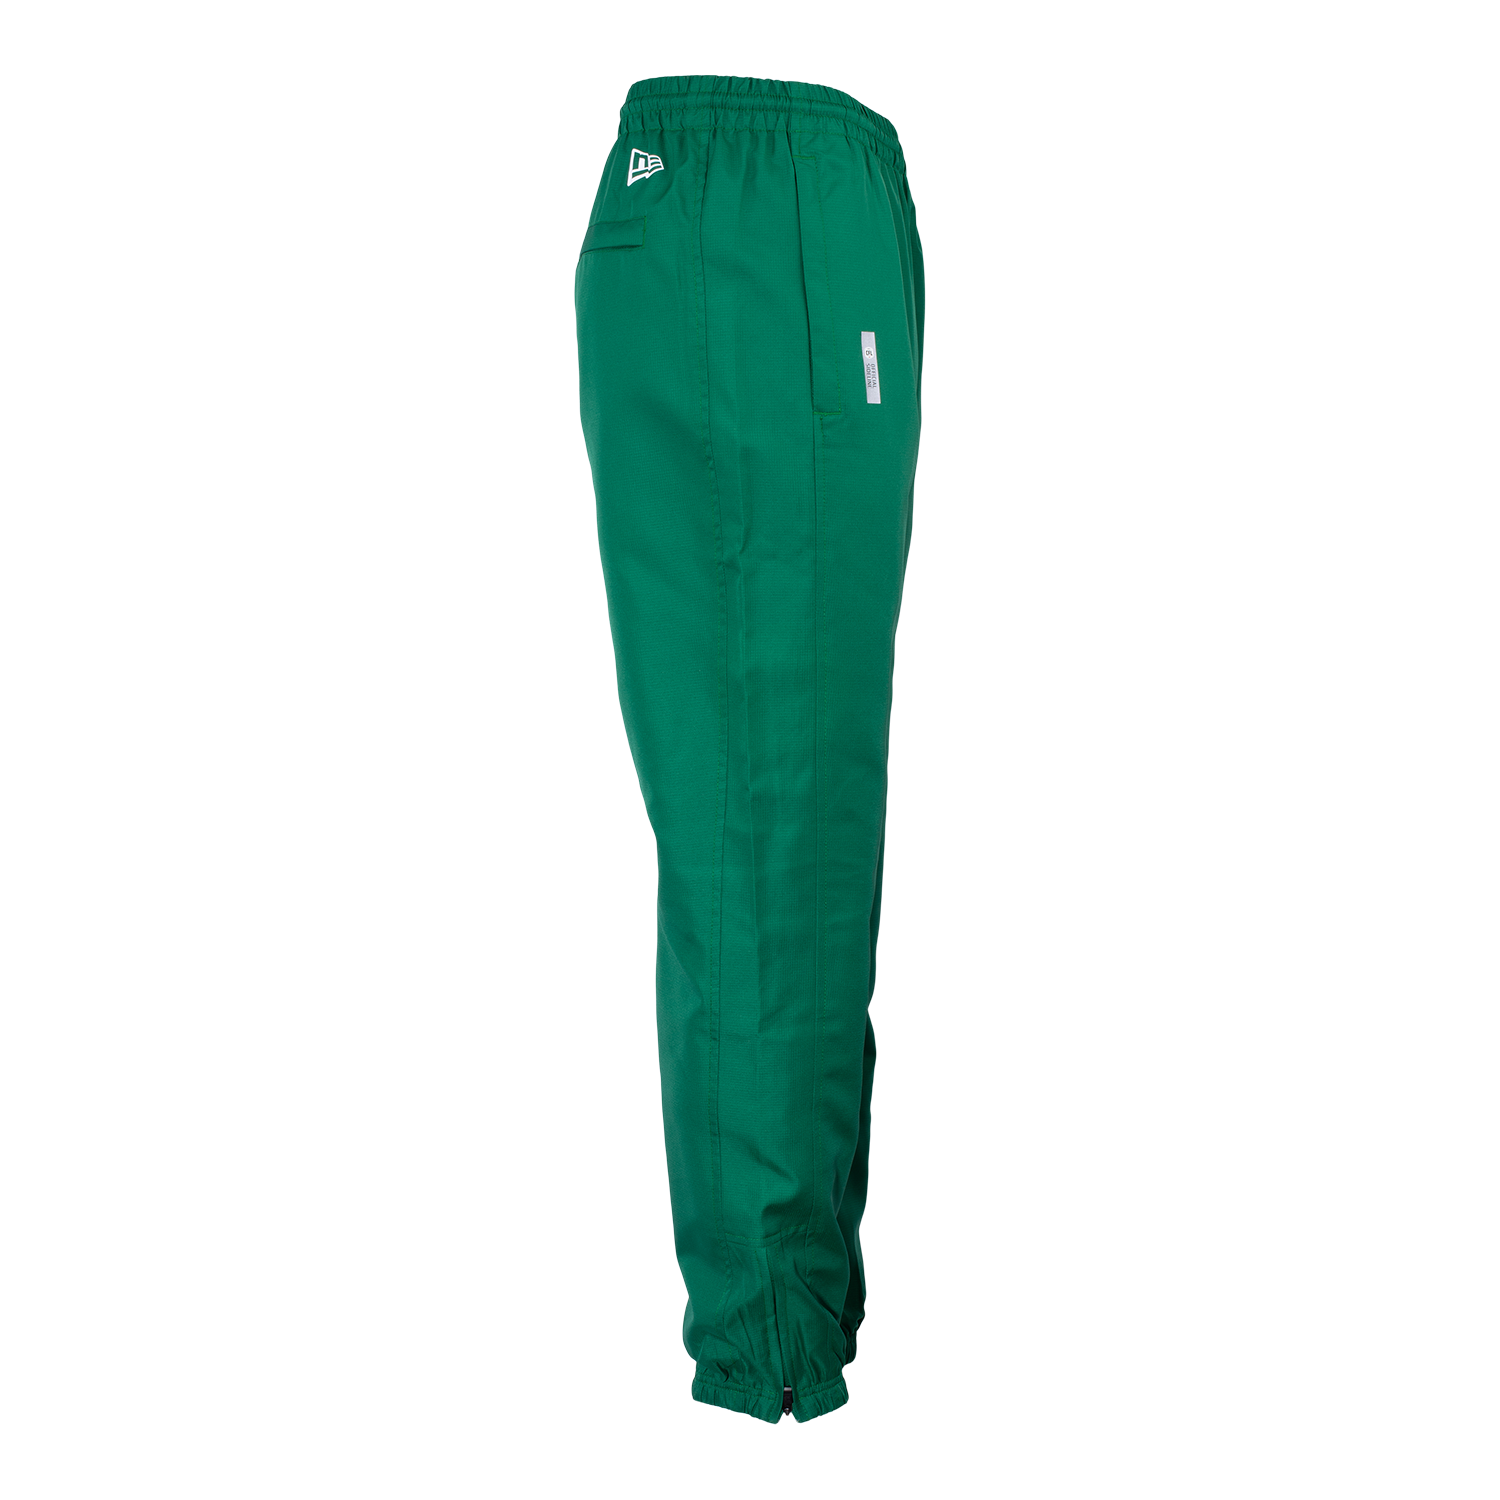 Sideline Friction Woven Ripstop Pants